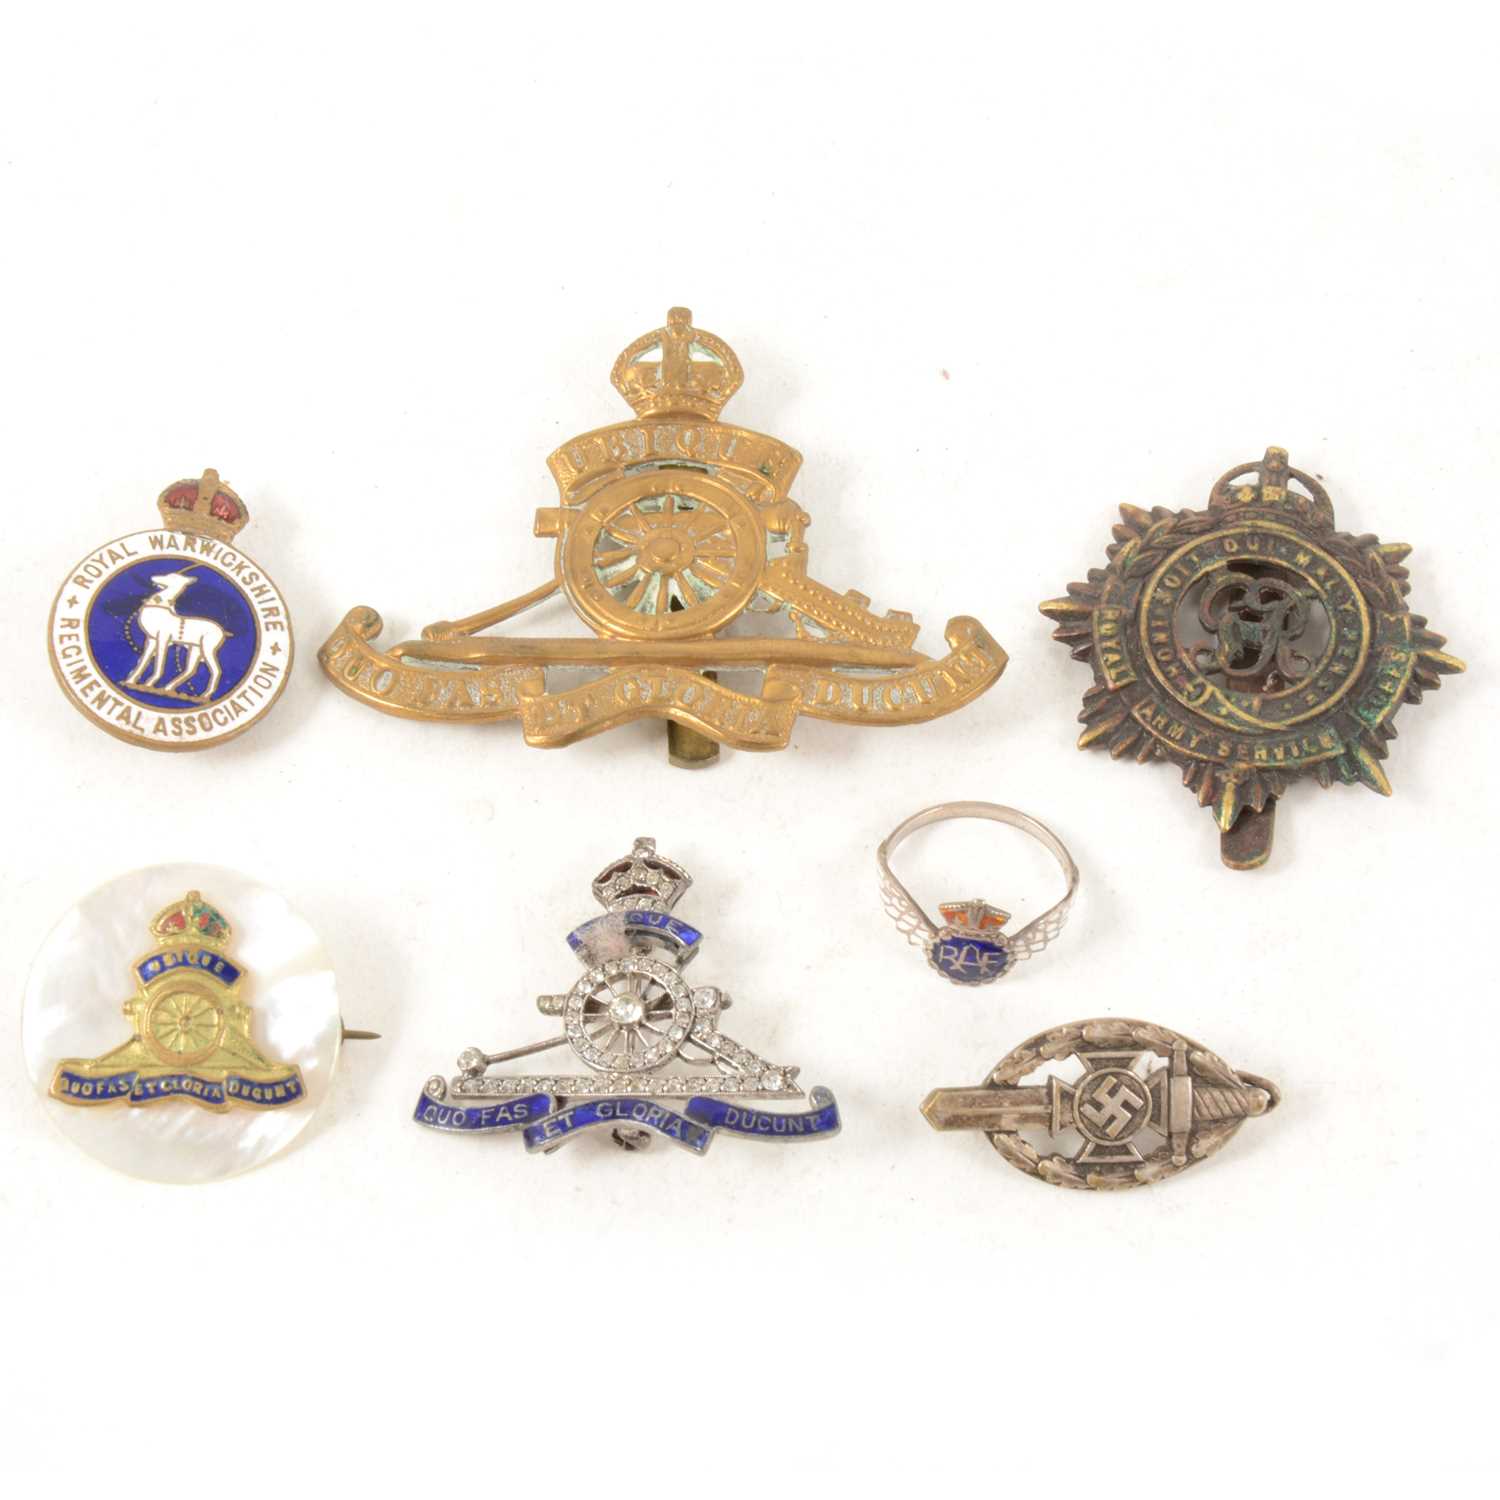 Lot 116 - WWII Royal Artillery 'Jewelled Sweetheart Brooch', an RAF ring,cap badges etc